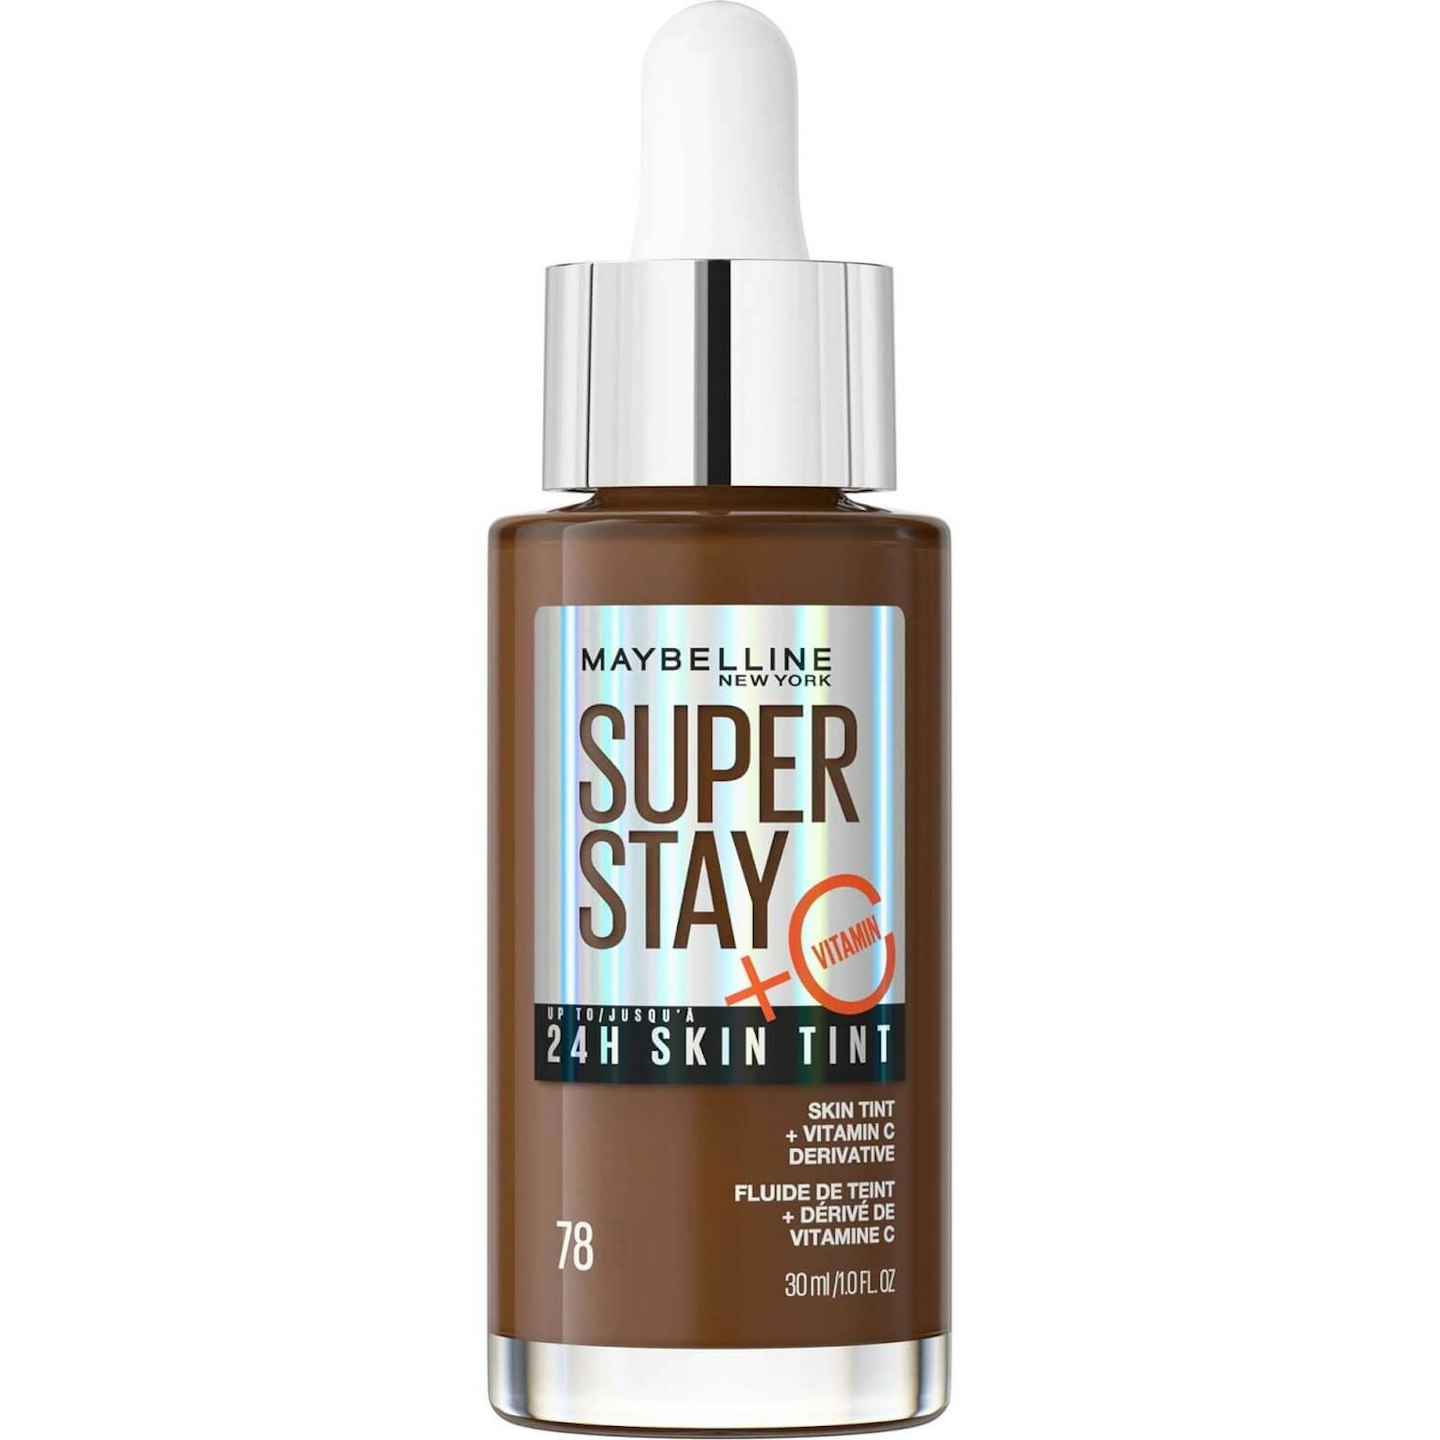 Maybelline, Super Stay up to 24H Skin Tint Foundation + Vitamin C